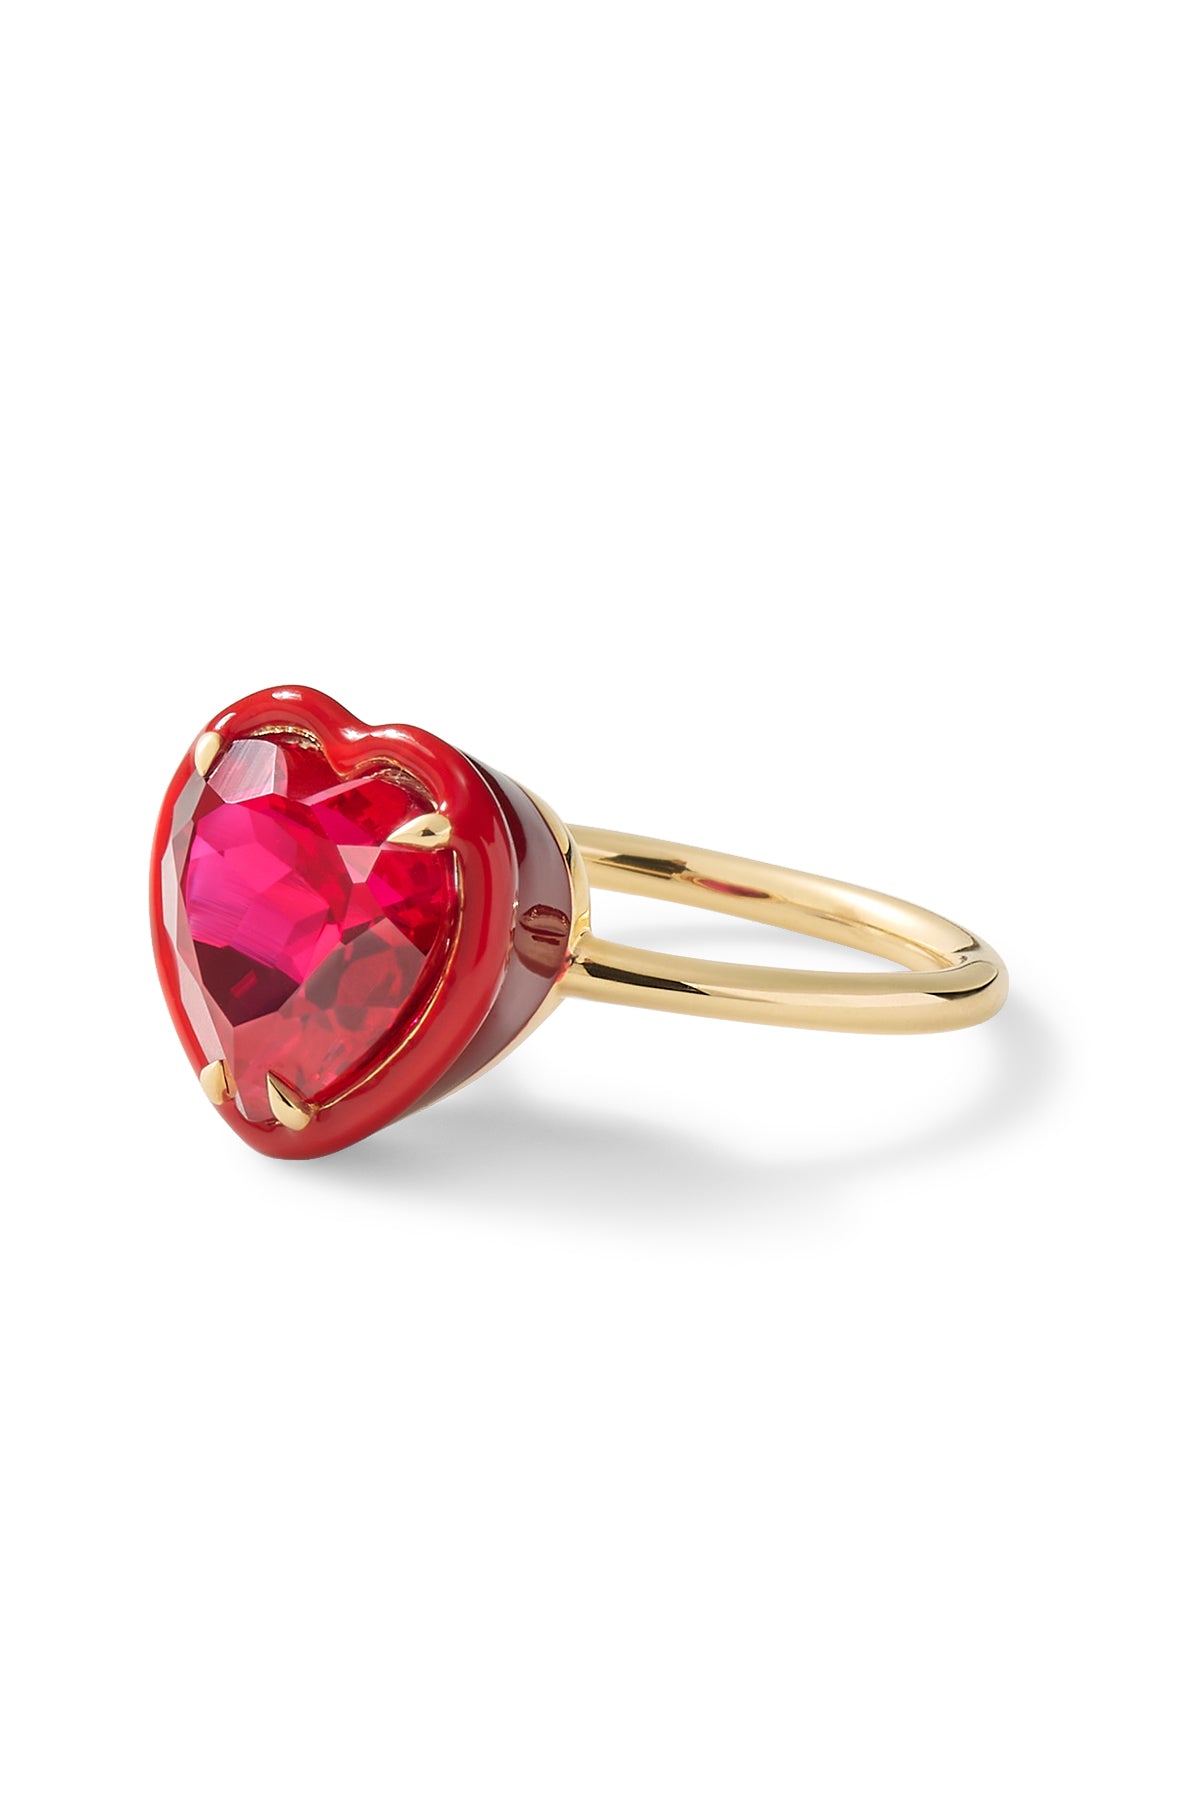 Louis Vuitton Resin Inclusion Ring - Cocktail Ring, Rings - LOU731264